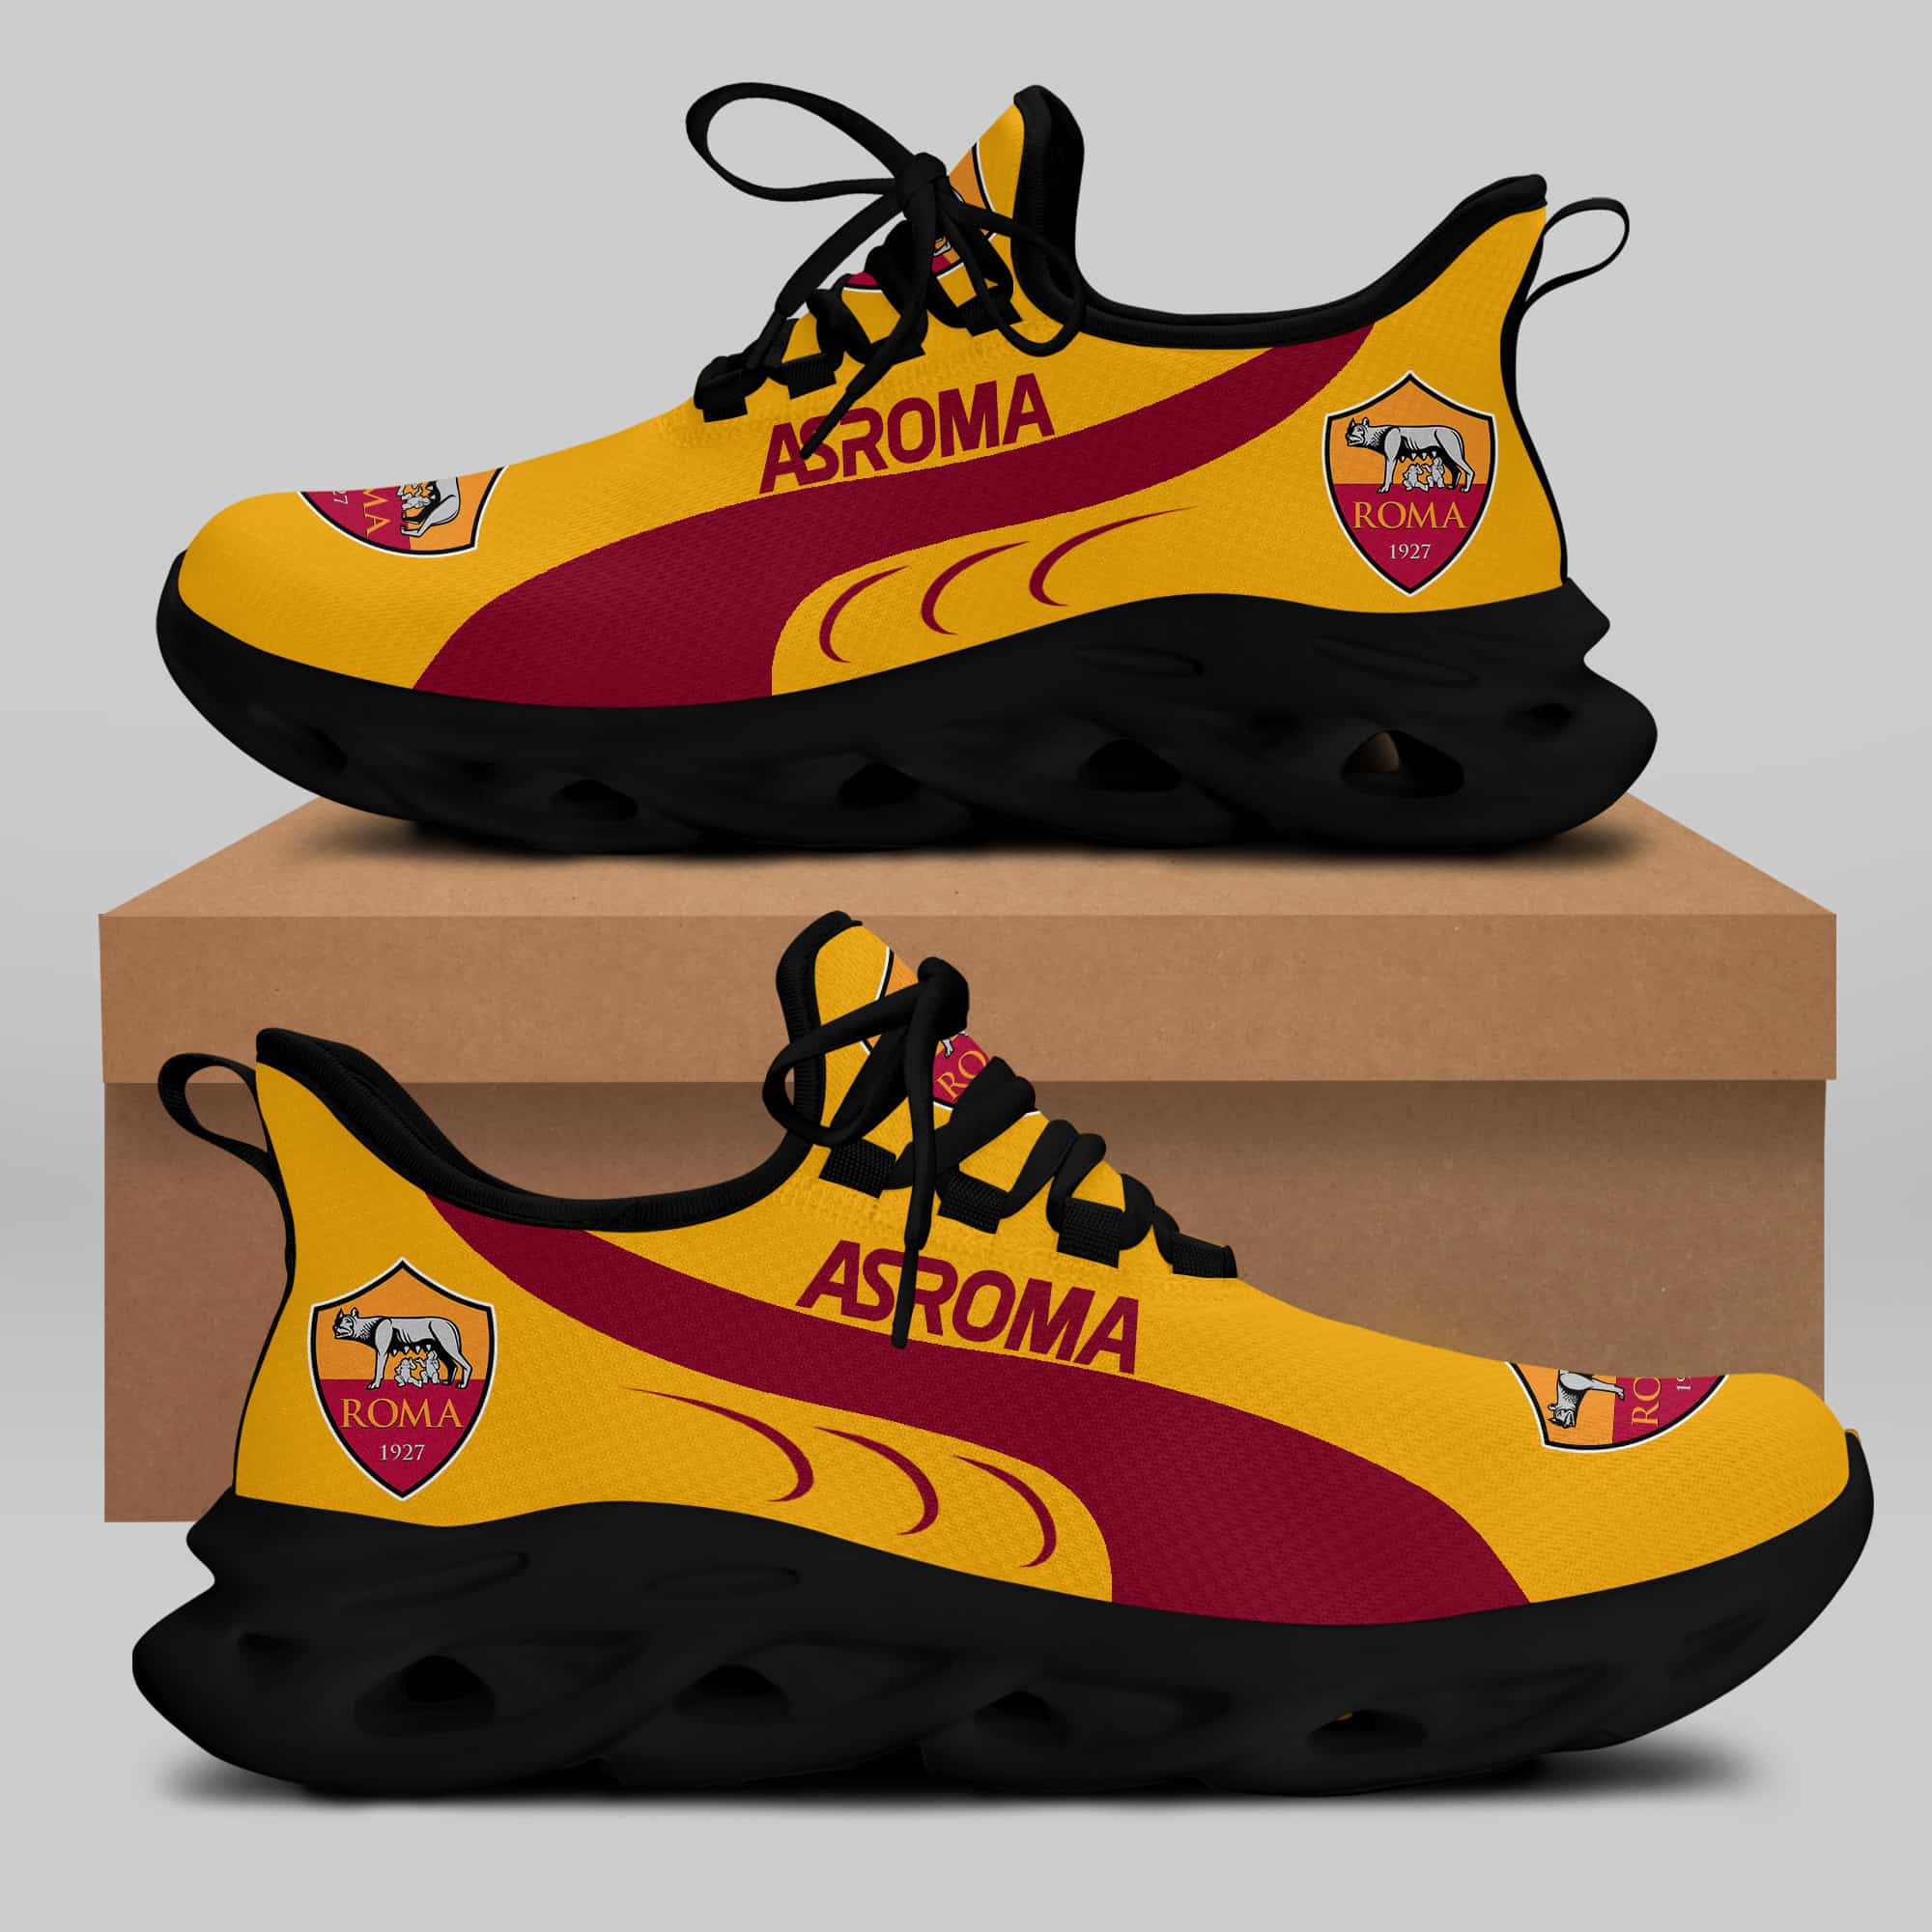 As Roma Running Shoes Max Soul Shoes Sneakers Ver 3 1